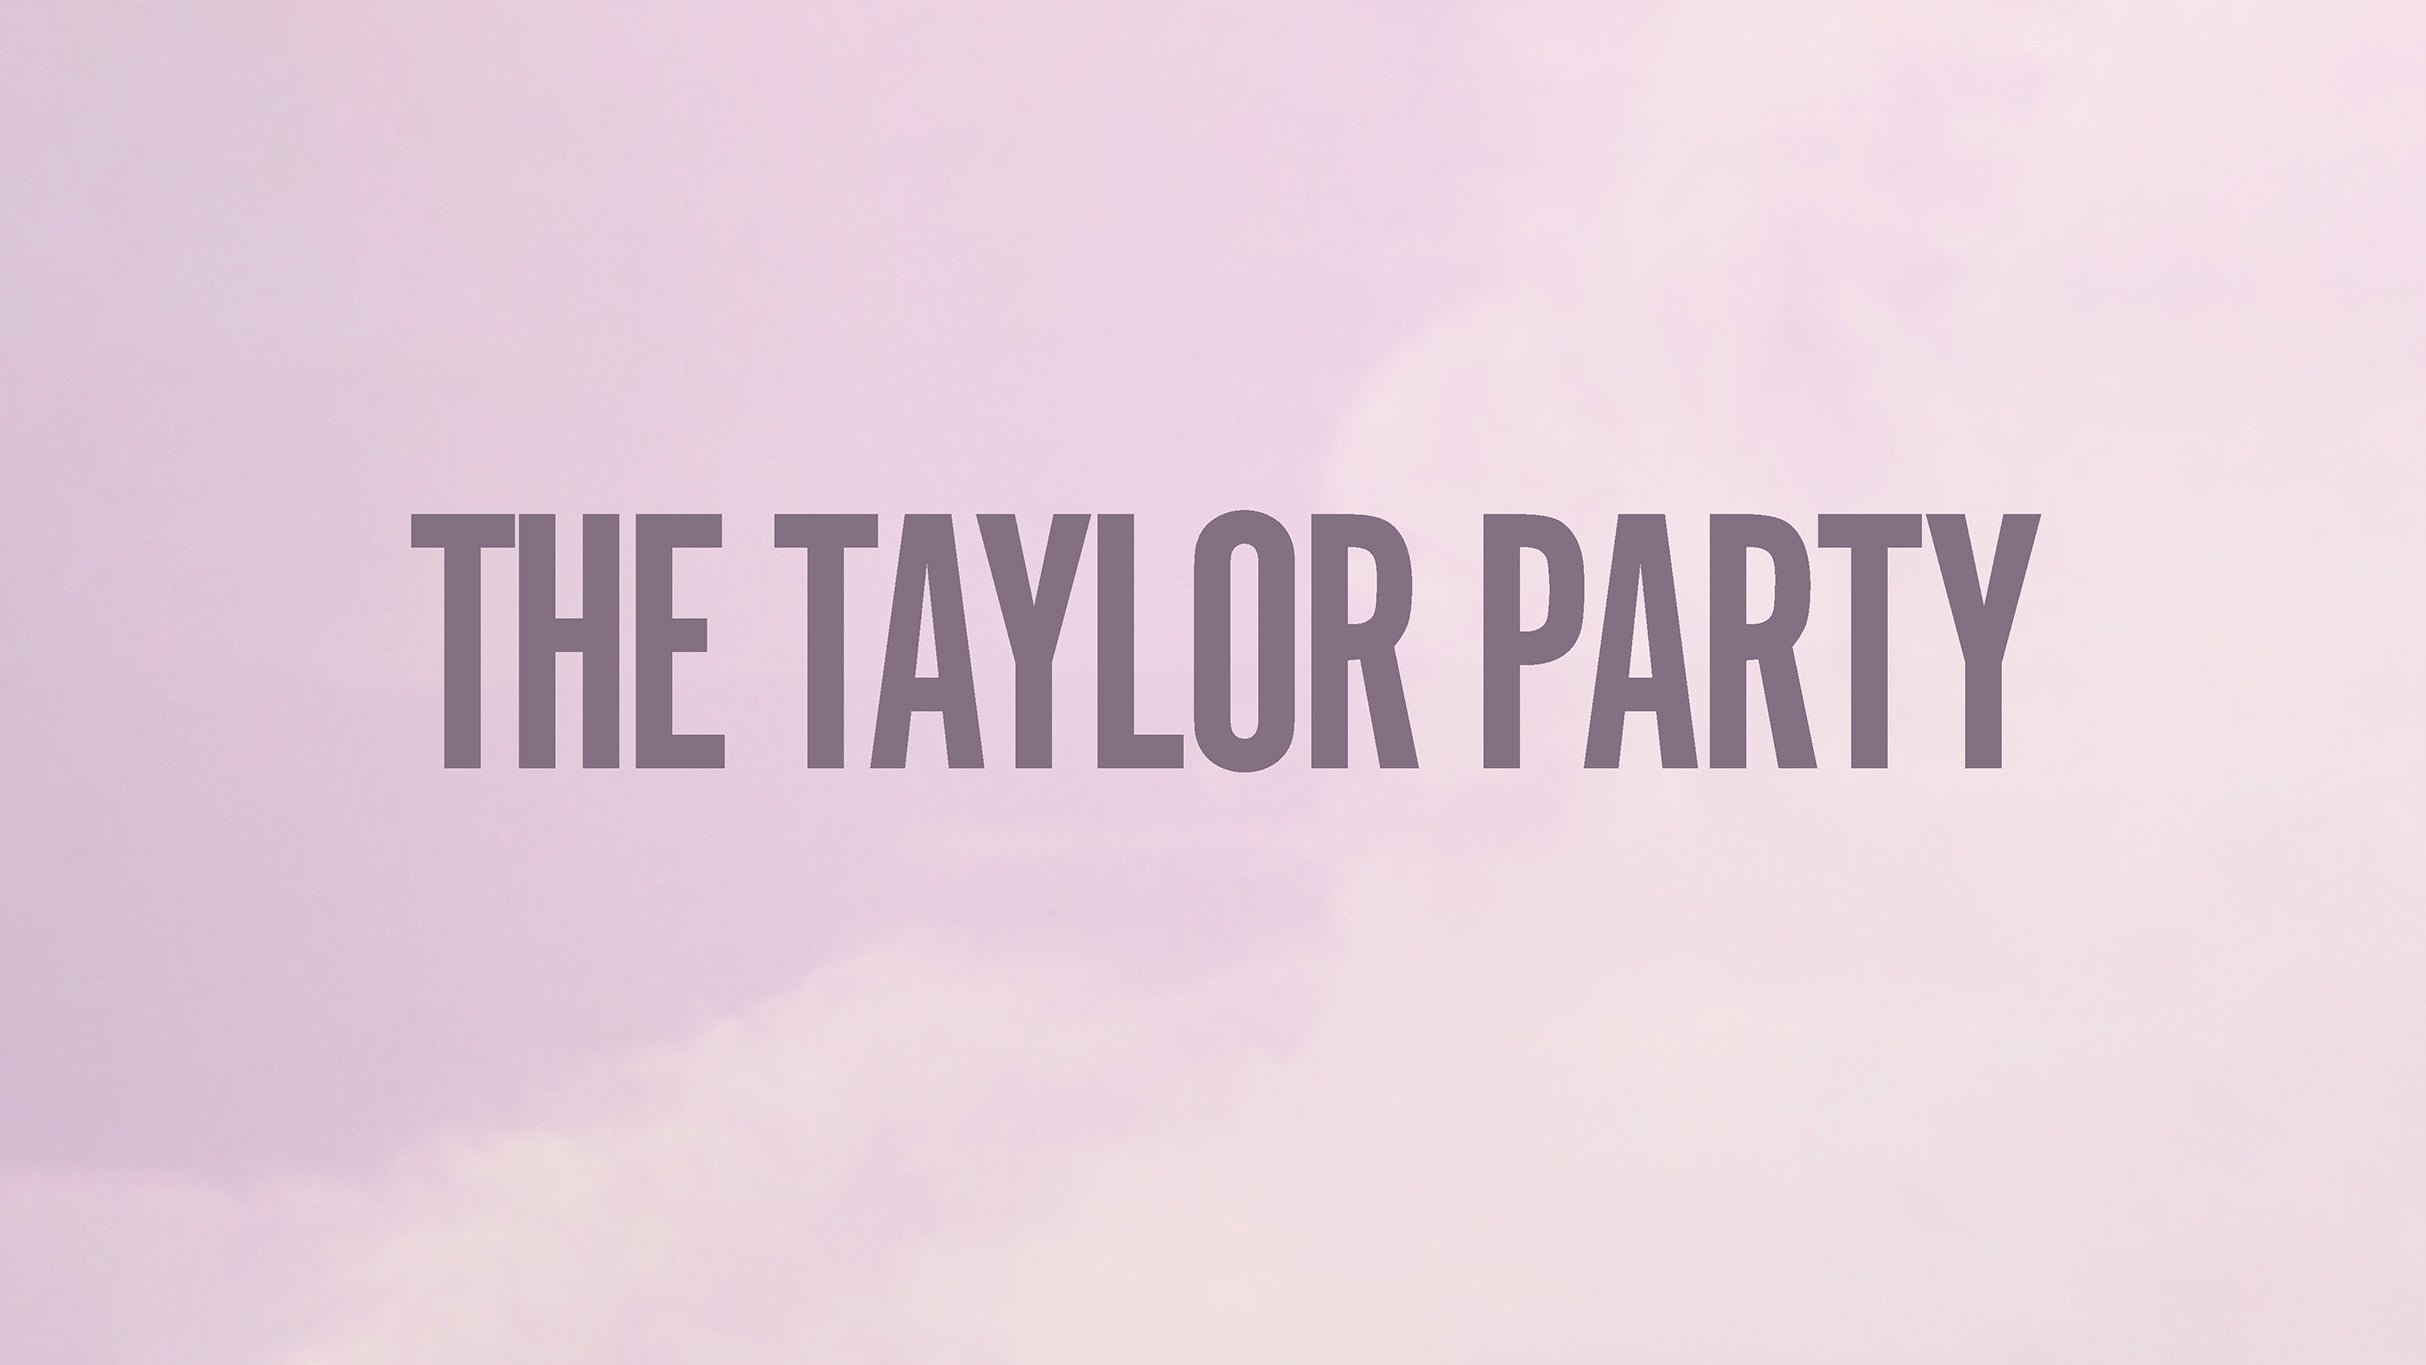 THE TAYLOR PARTY: THE TS DANCE PARTY - All Ages presale c0de for early tickets in Columbus